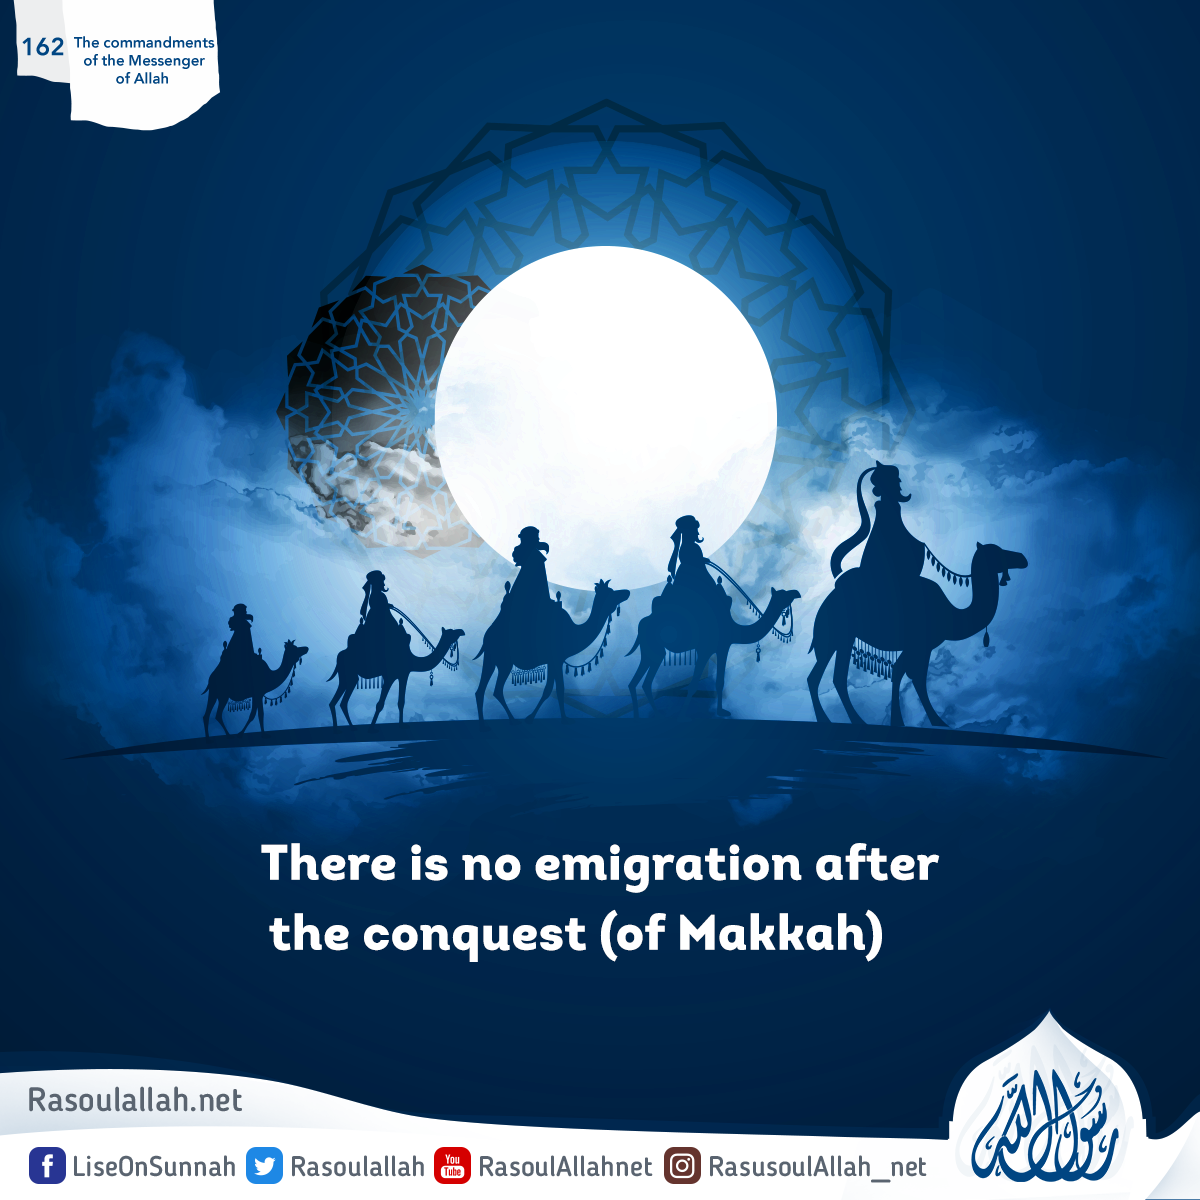 There is no emigration after the conquest (of Makkah)